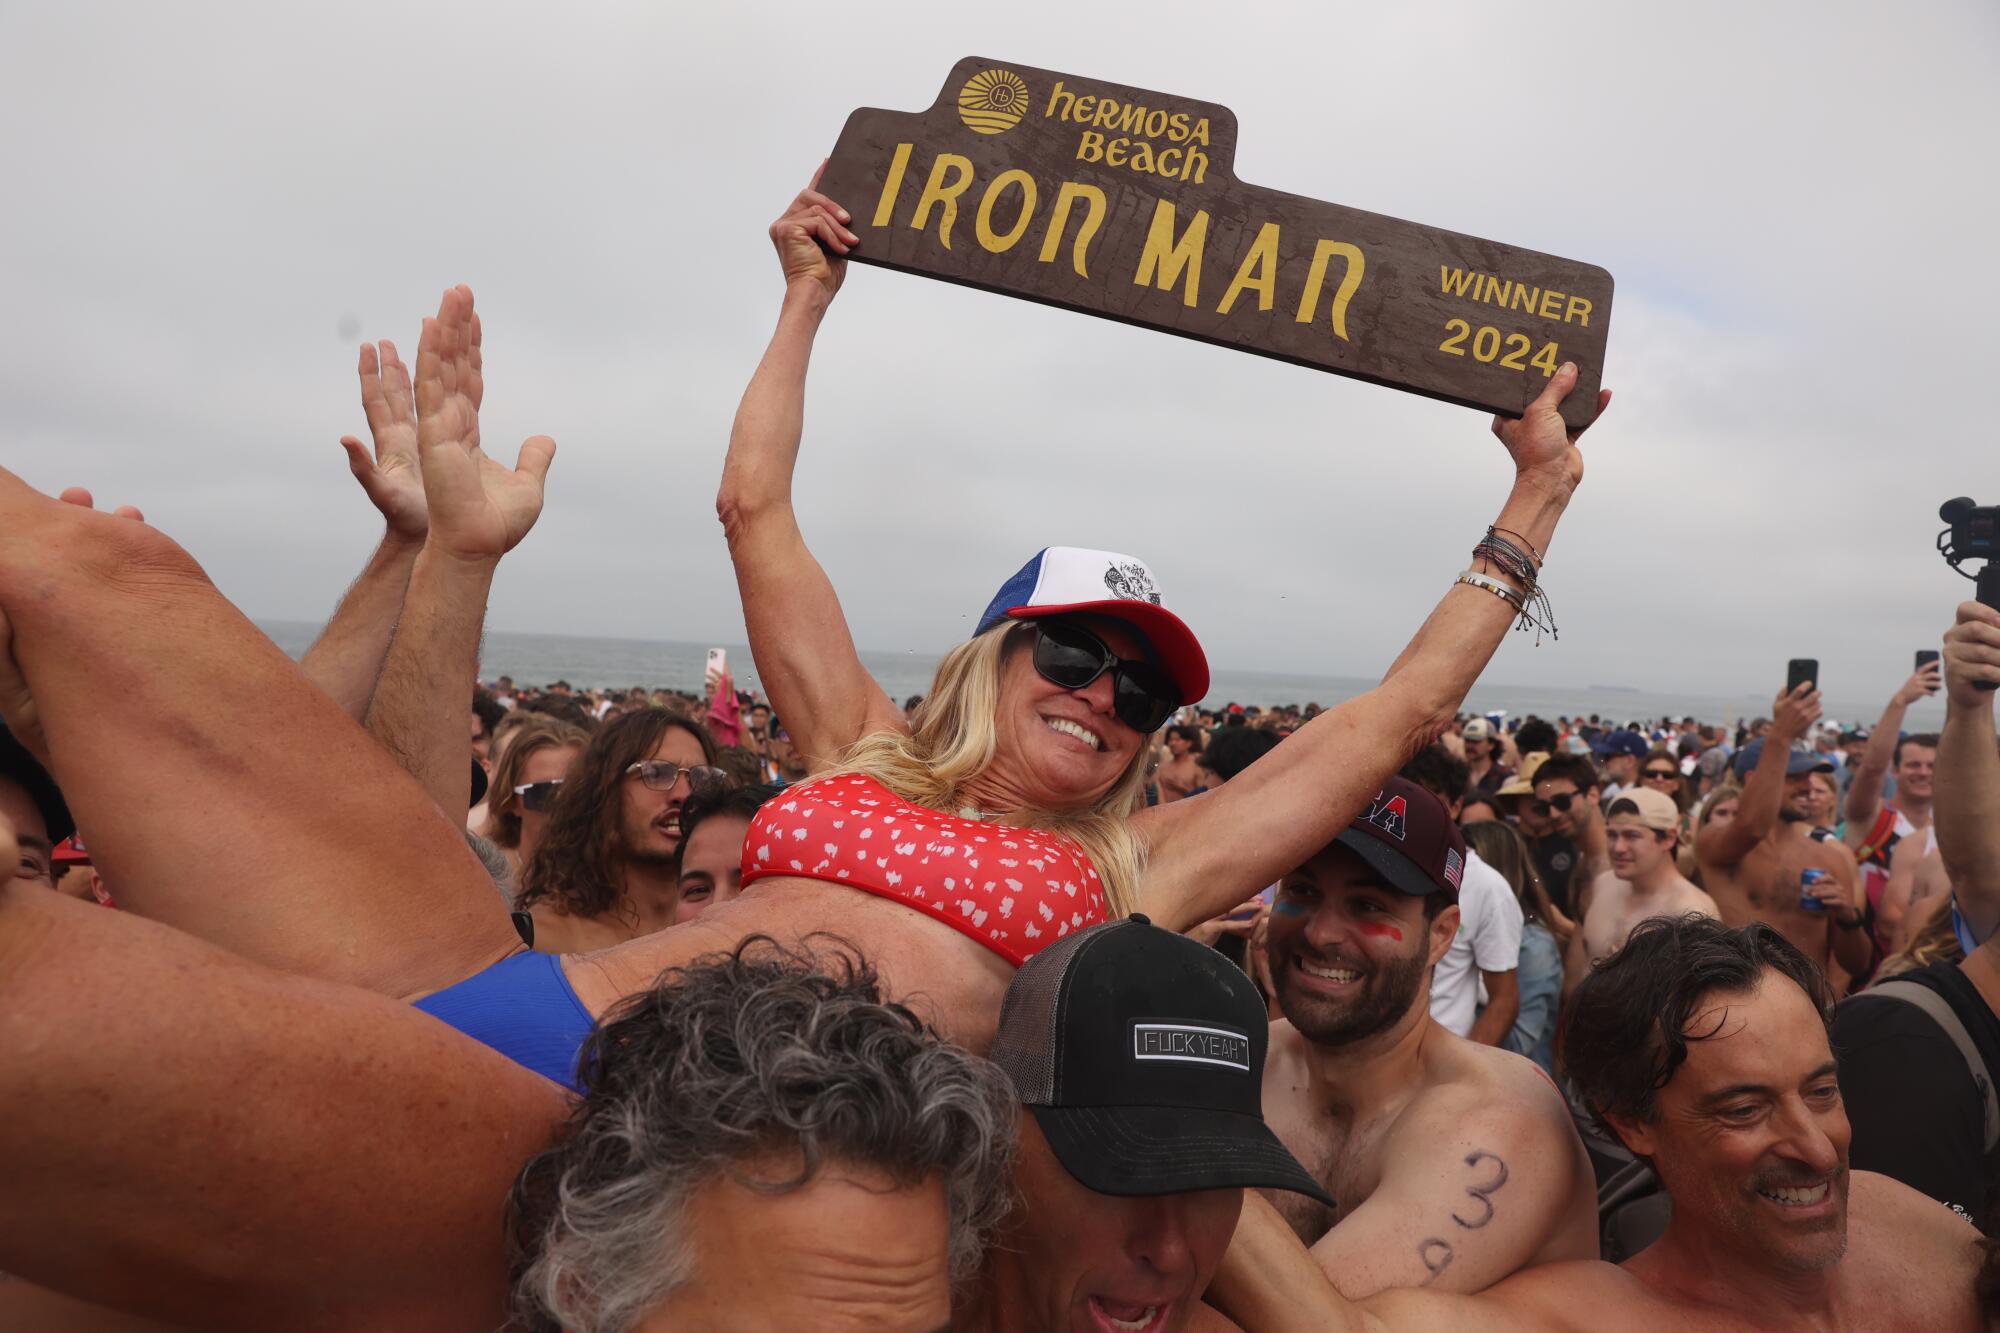 Annie Seawright celebrates while being carried by people after winning the Hermosa Beach Ironman competition.